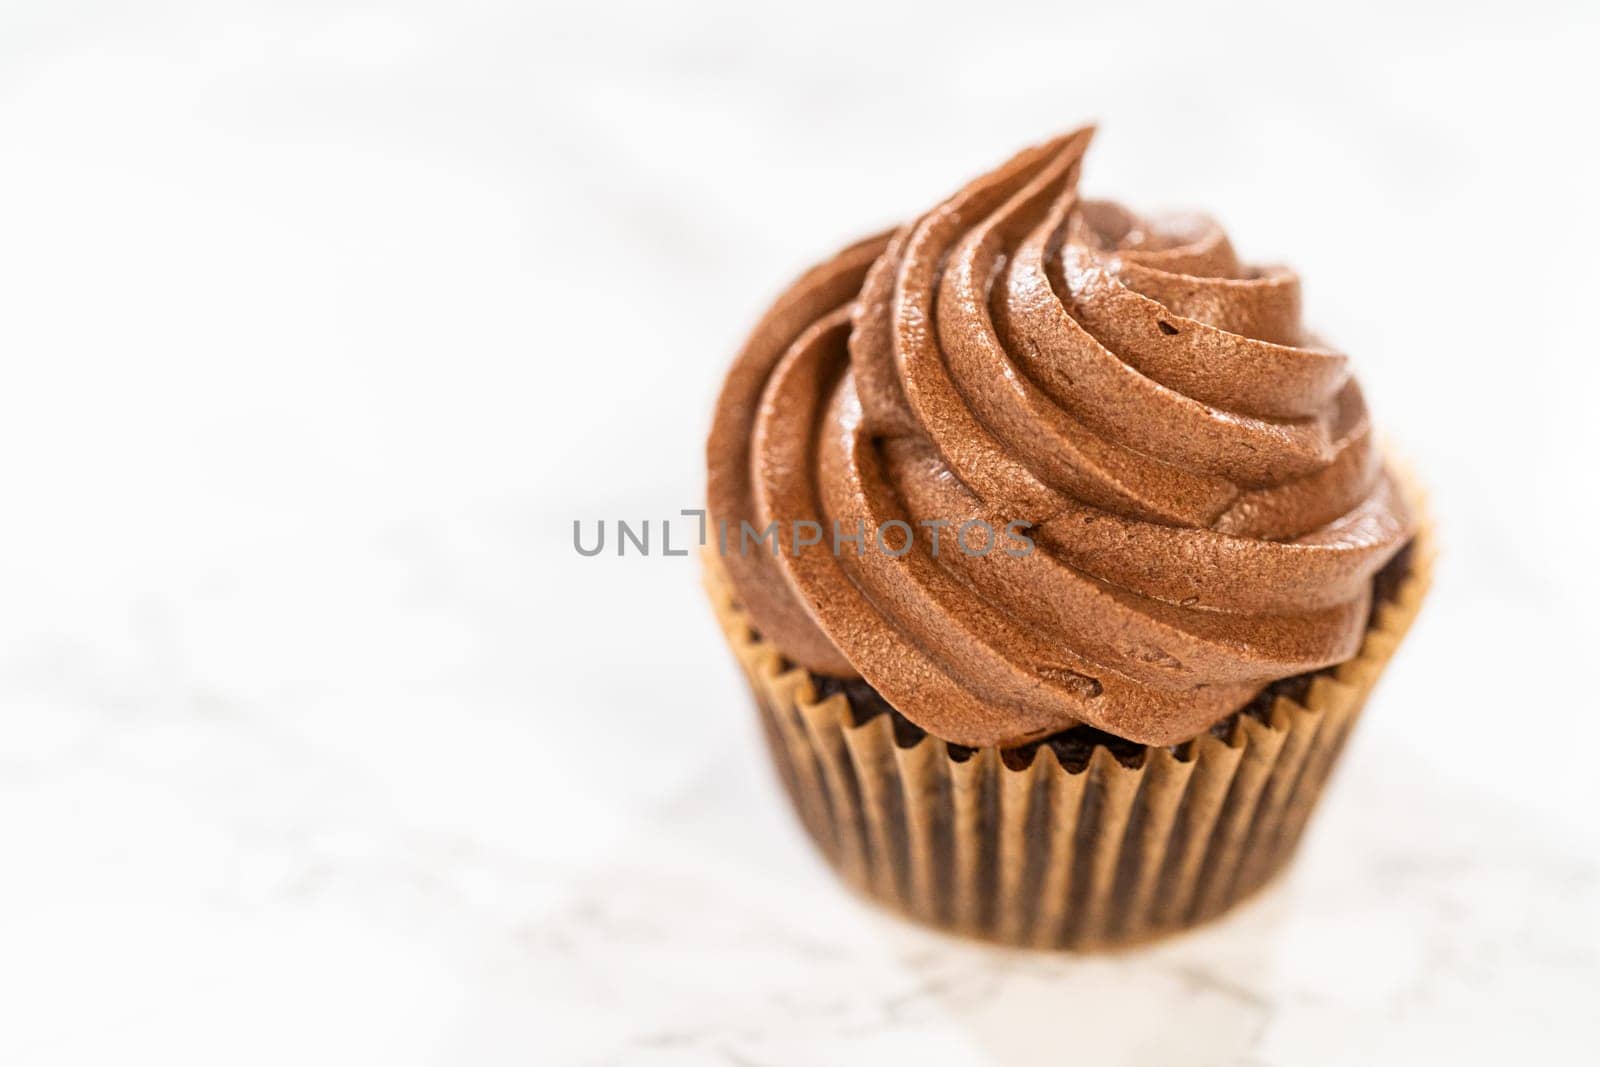 A single, indulgent chocolate cupcake sits gracefully on the kitchen counter, tempting your taste buds.